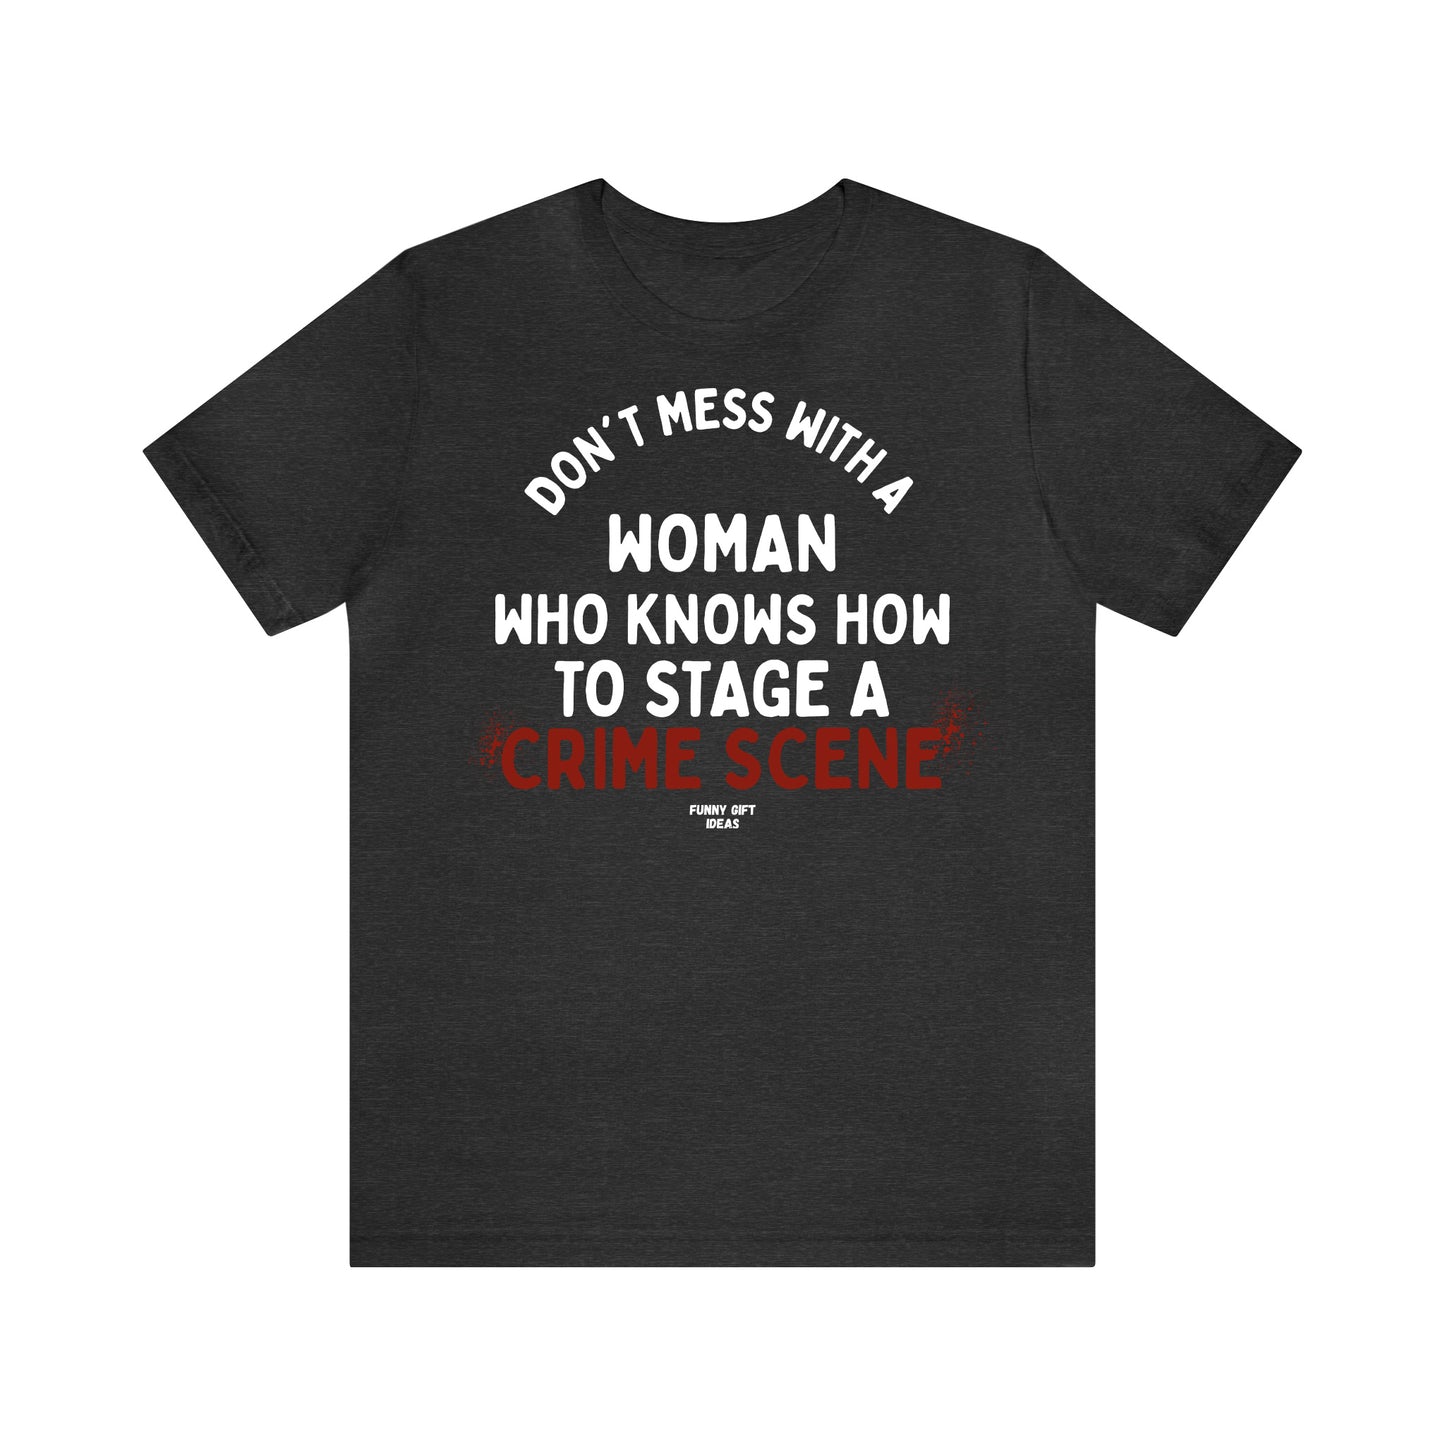 Funny Shirts for Women - Don't Mess With a Woman Who Knows How to Stage a Crime Scene - Women's T Shirts